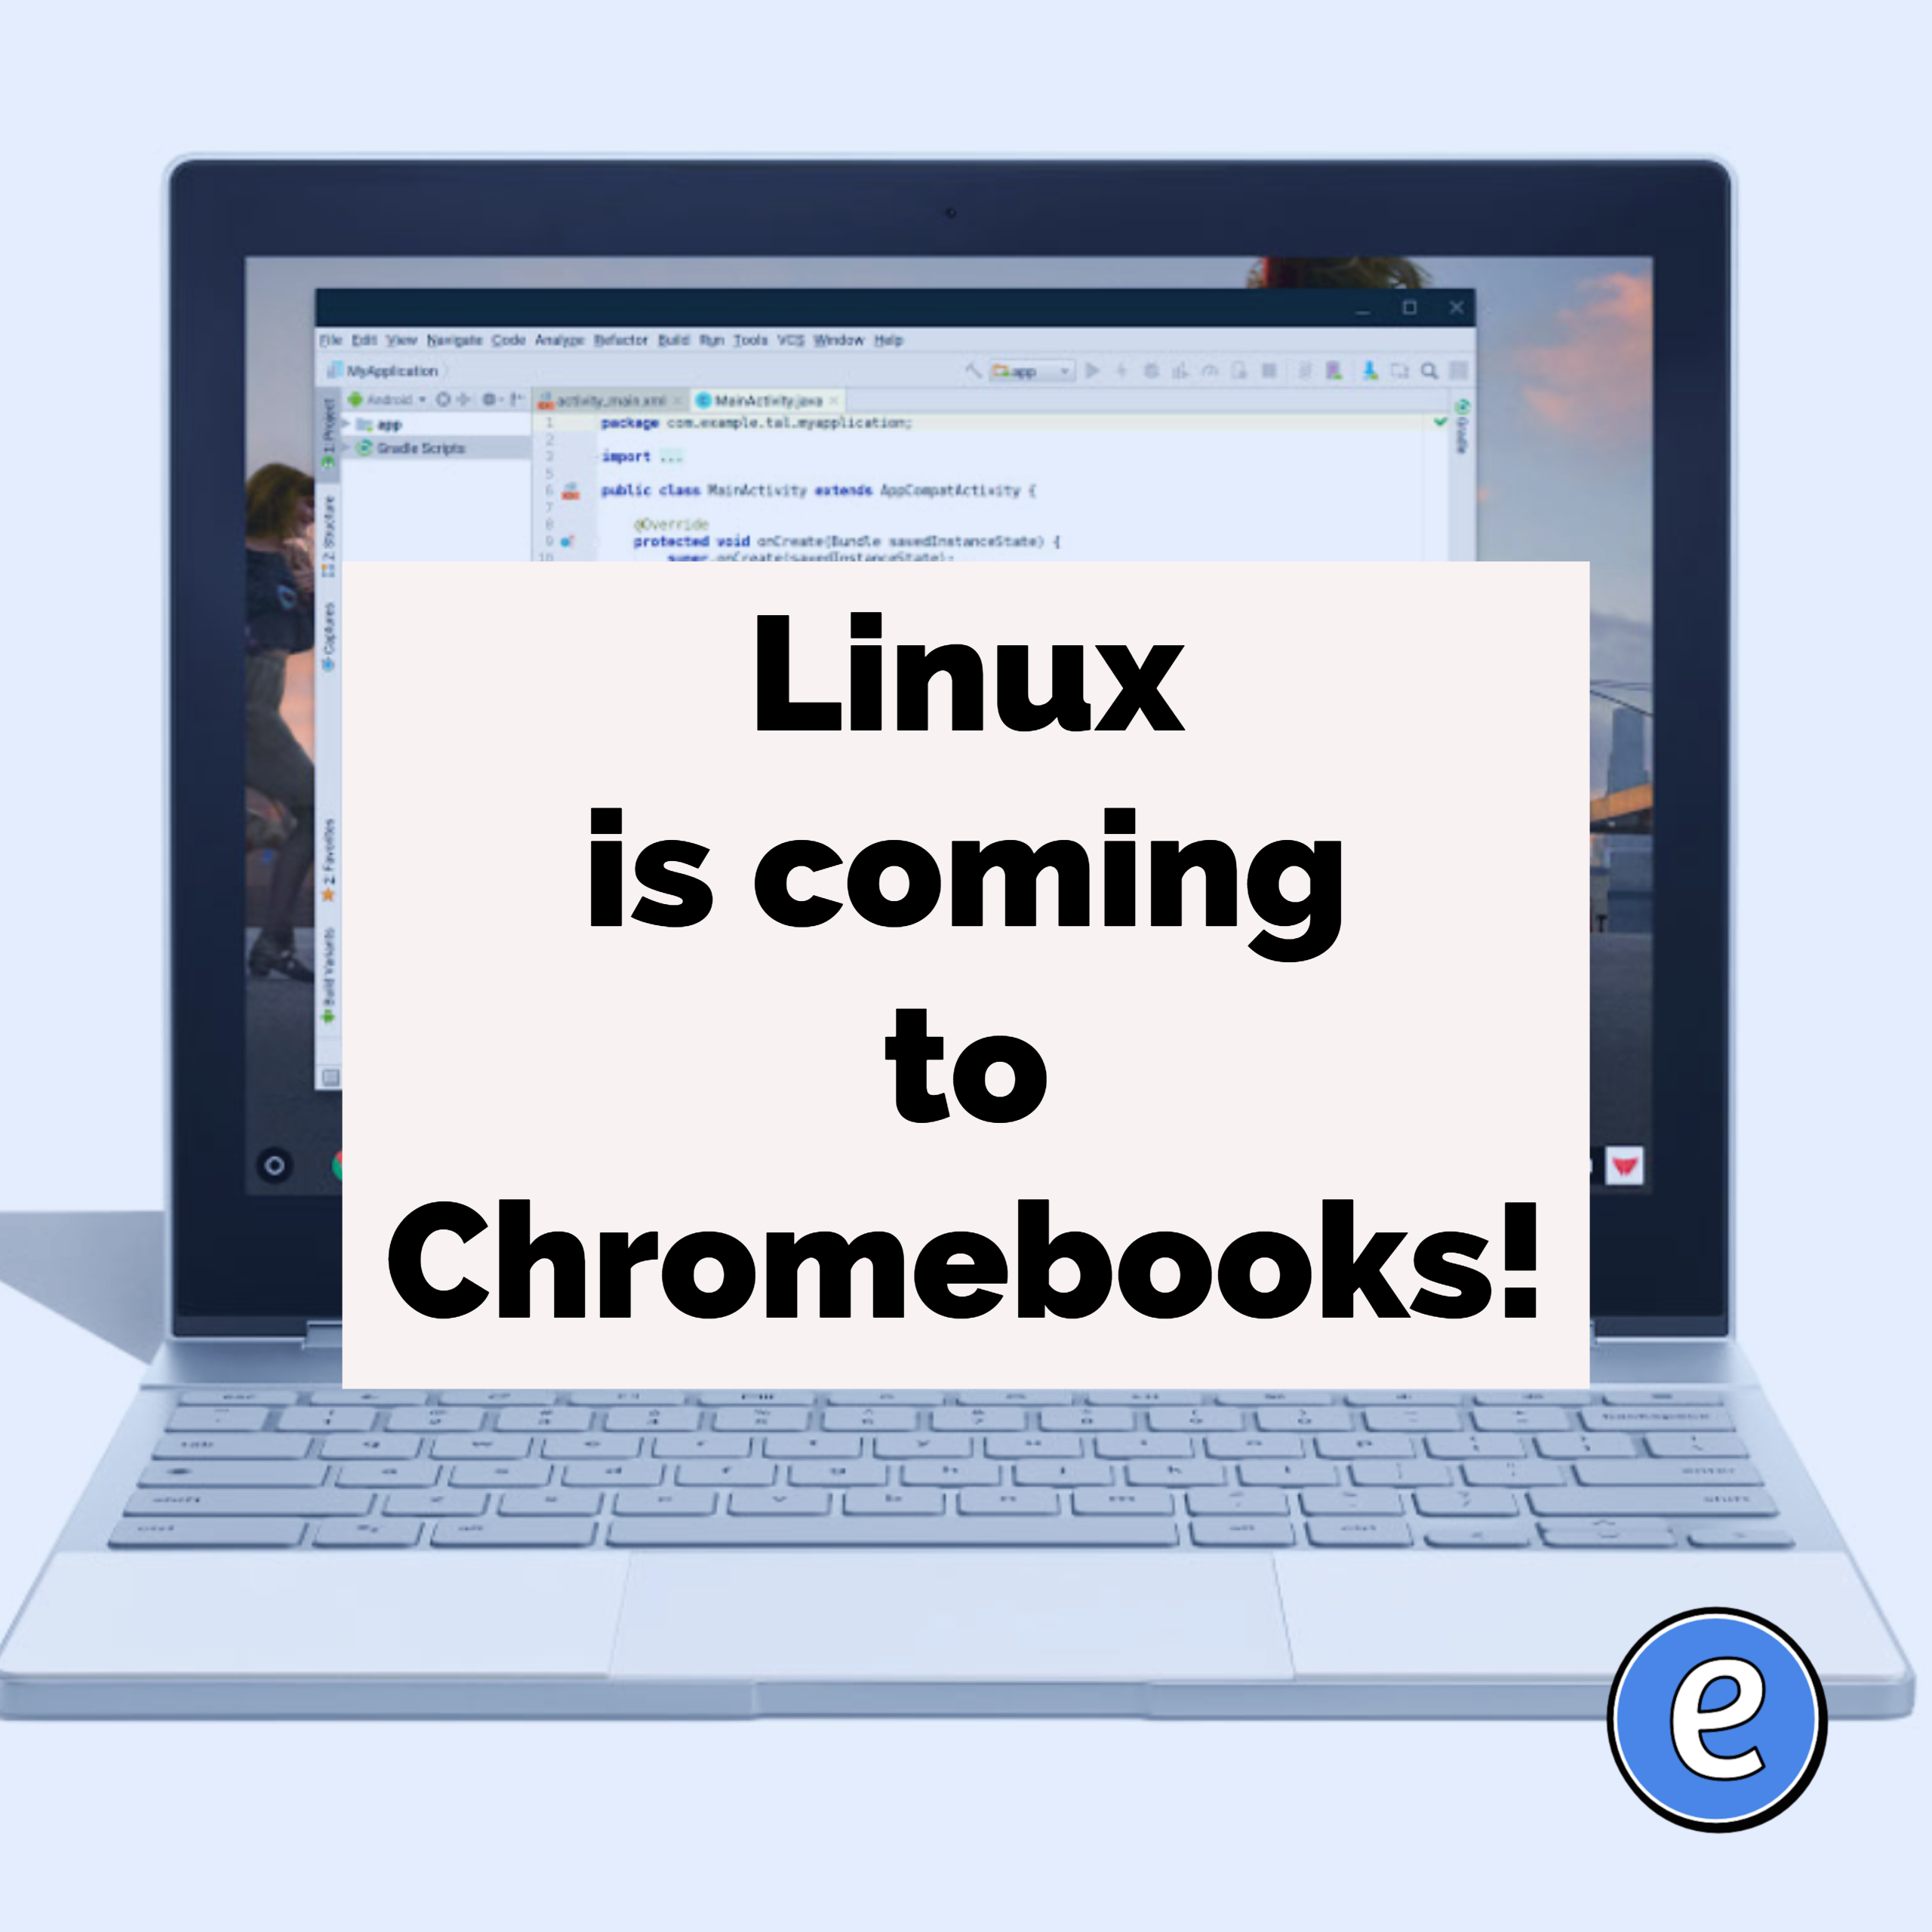 Linux is coming to Chromebooks!